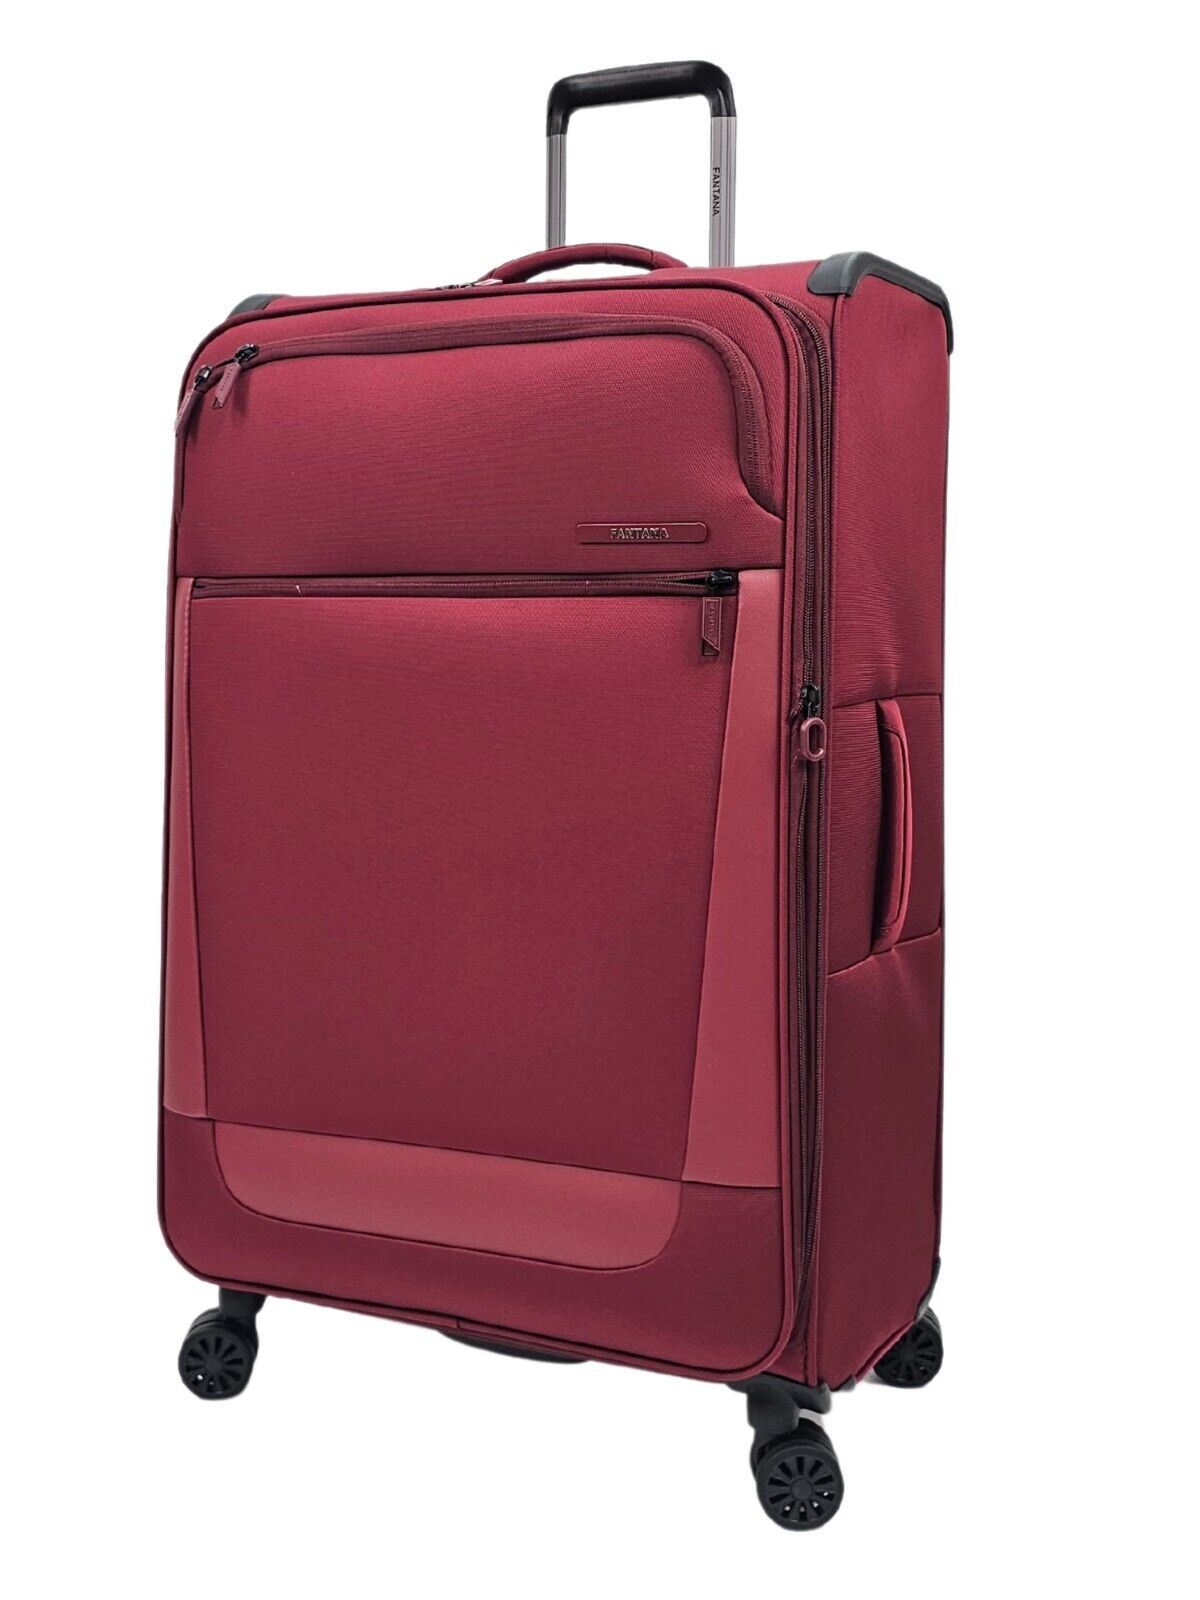 Lightweight Burgundy Suitcases 4 Wheel Luggage Travel Cabin Bag - Upperclass Fashions 